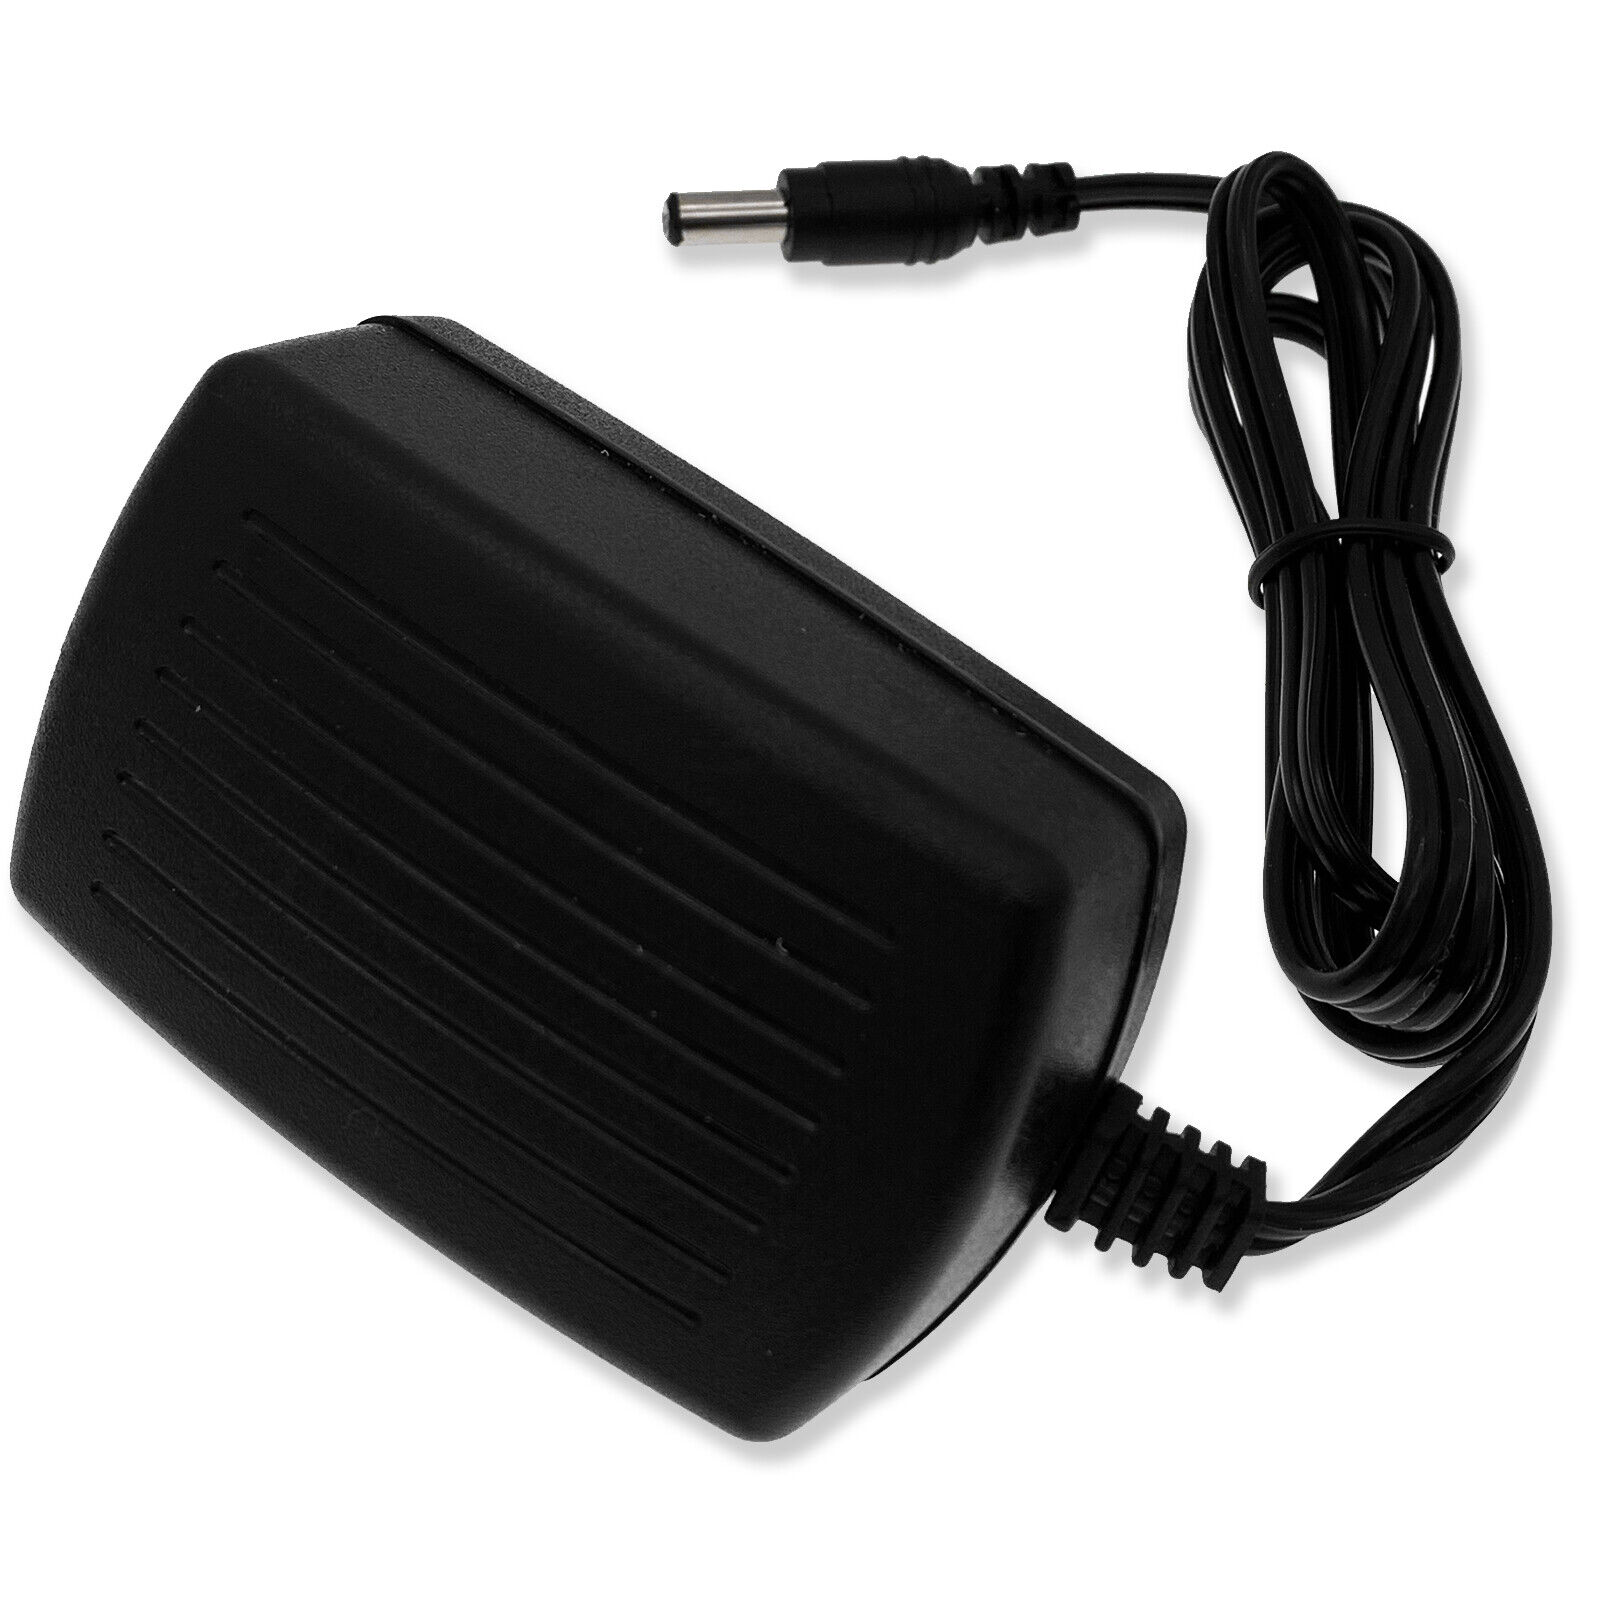 12V AC Adapter Charger For TC-Helicon VoiceLive 3 Vocal Processor Power Supply Construction: 100% Brand New! Generic Re